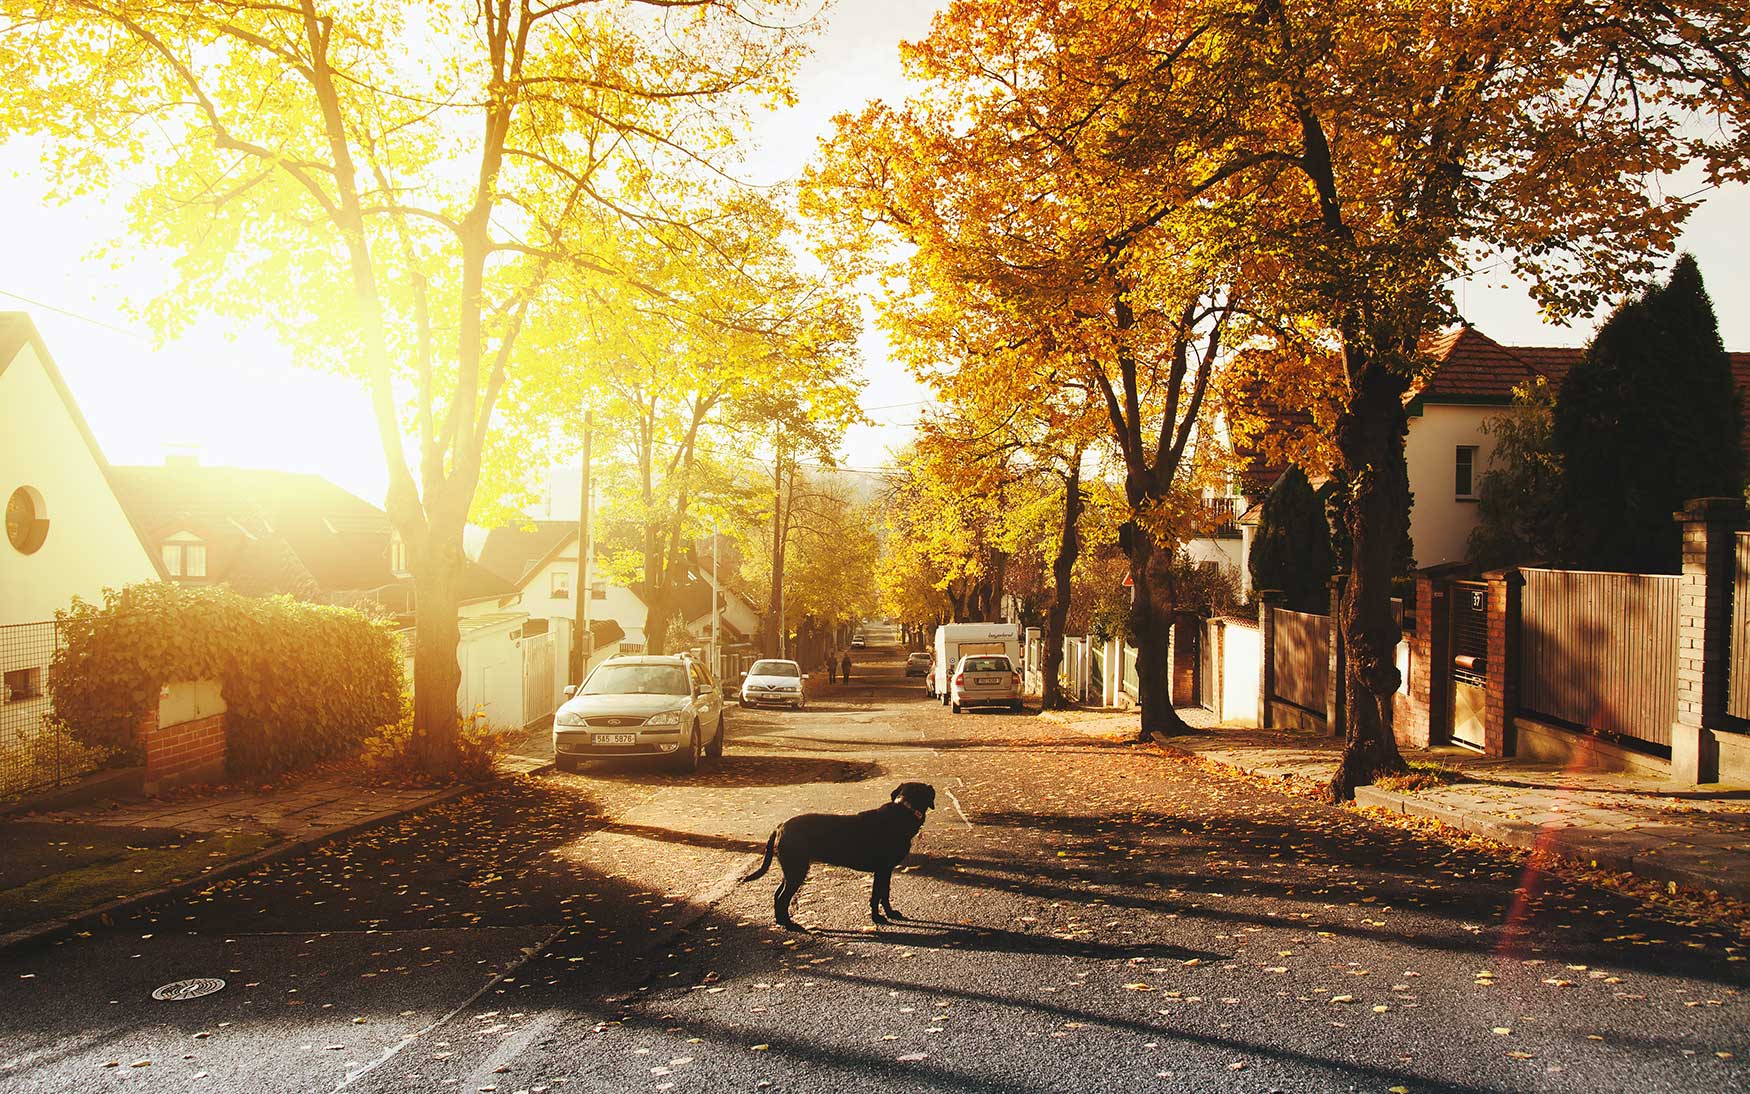 dog stands on road in a neighborhood